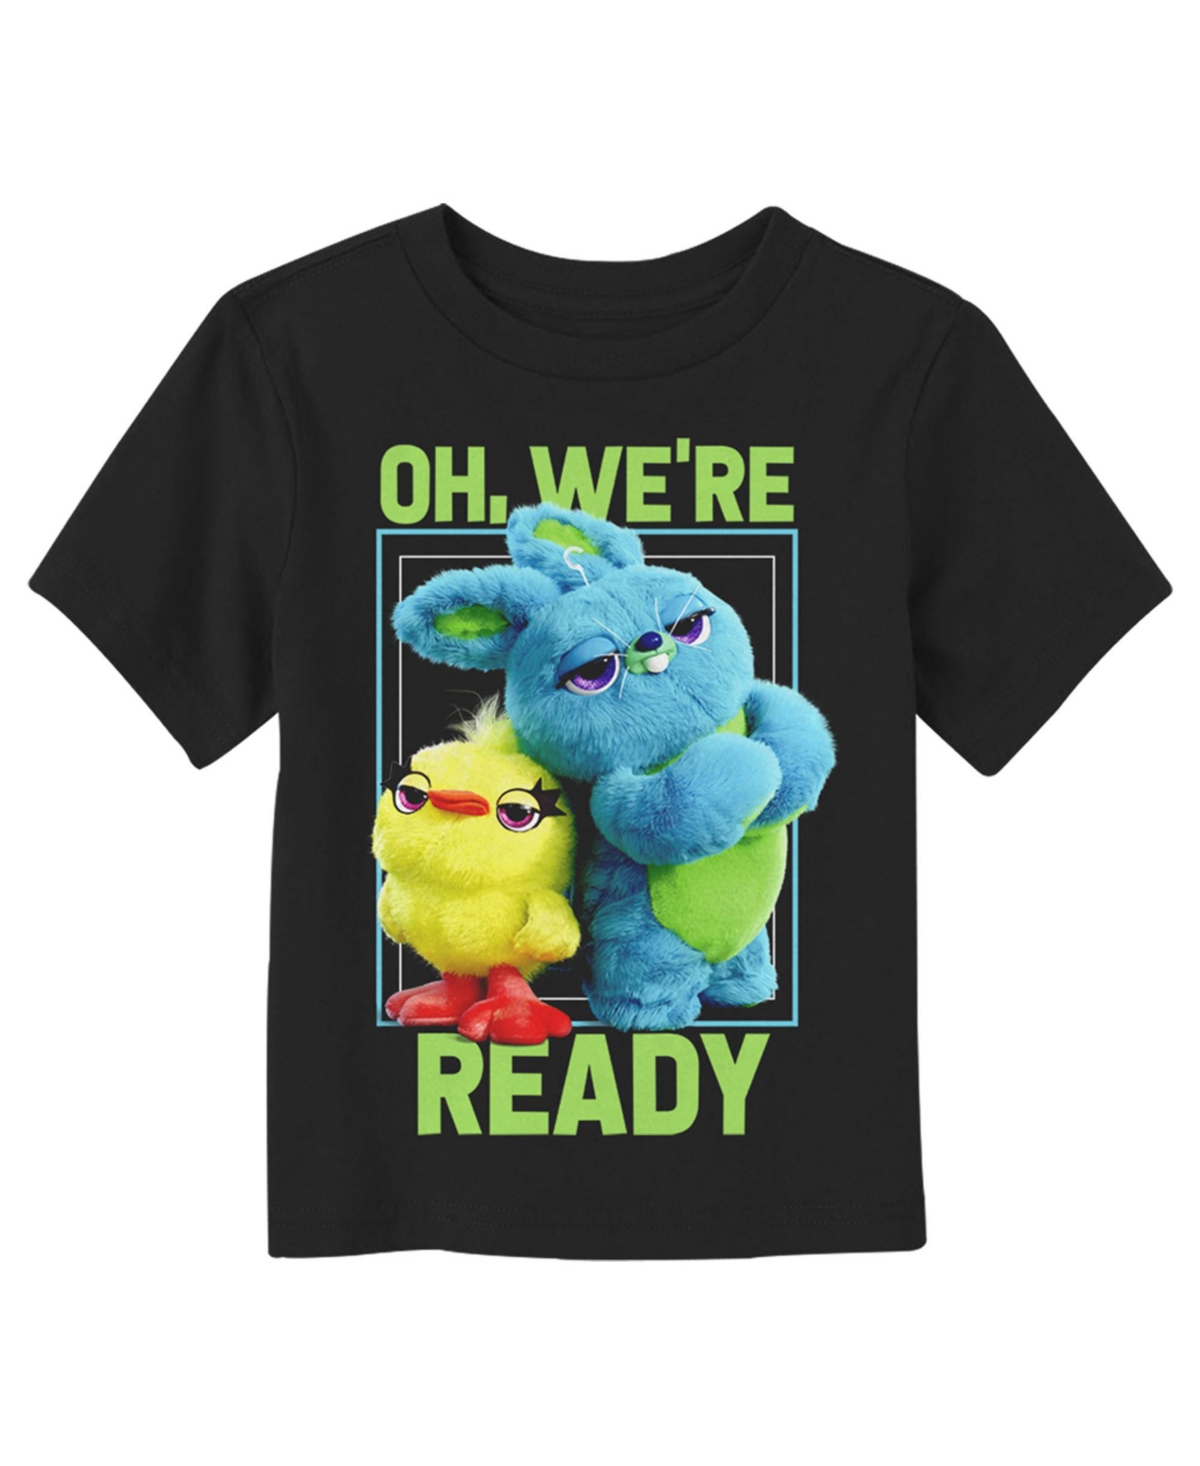 Disney Pixar Toddler's Toy Story 4 Ducky & Bunny Ready Pose Unisex T-shirt In Black